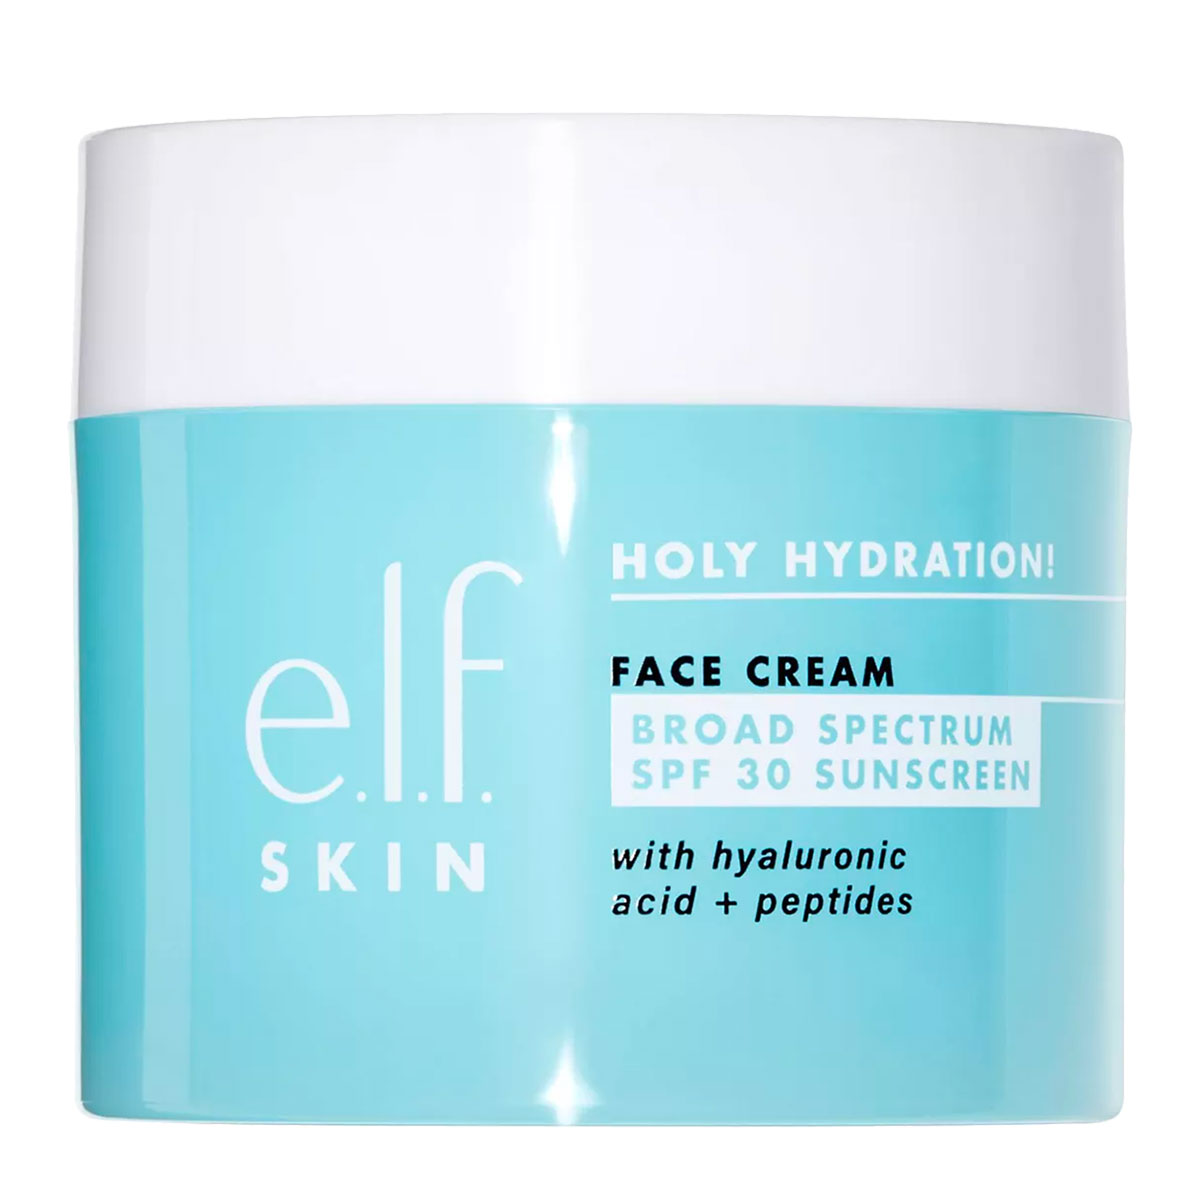 e.l.f. Holy Hydration! Face Cream Broad Spectrum SPF 30 Sunscreen with Hyaluronic Acid + Peptides 50 g